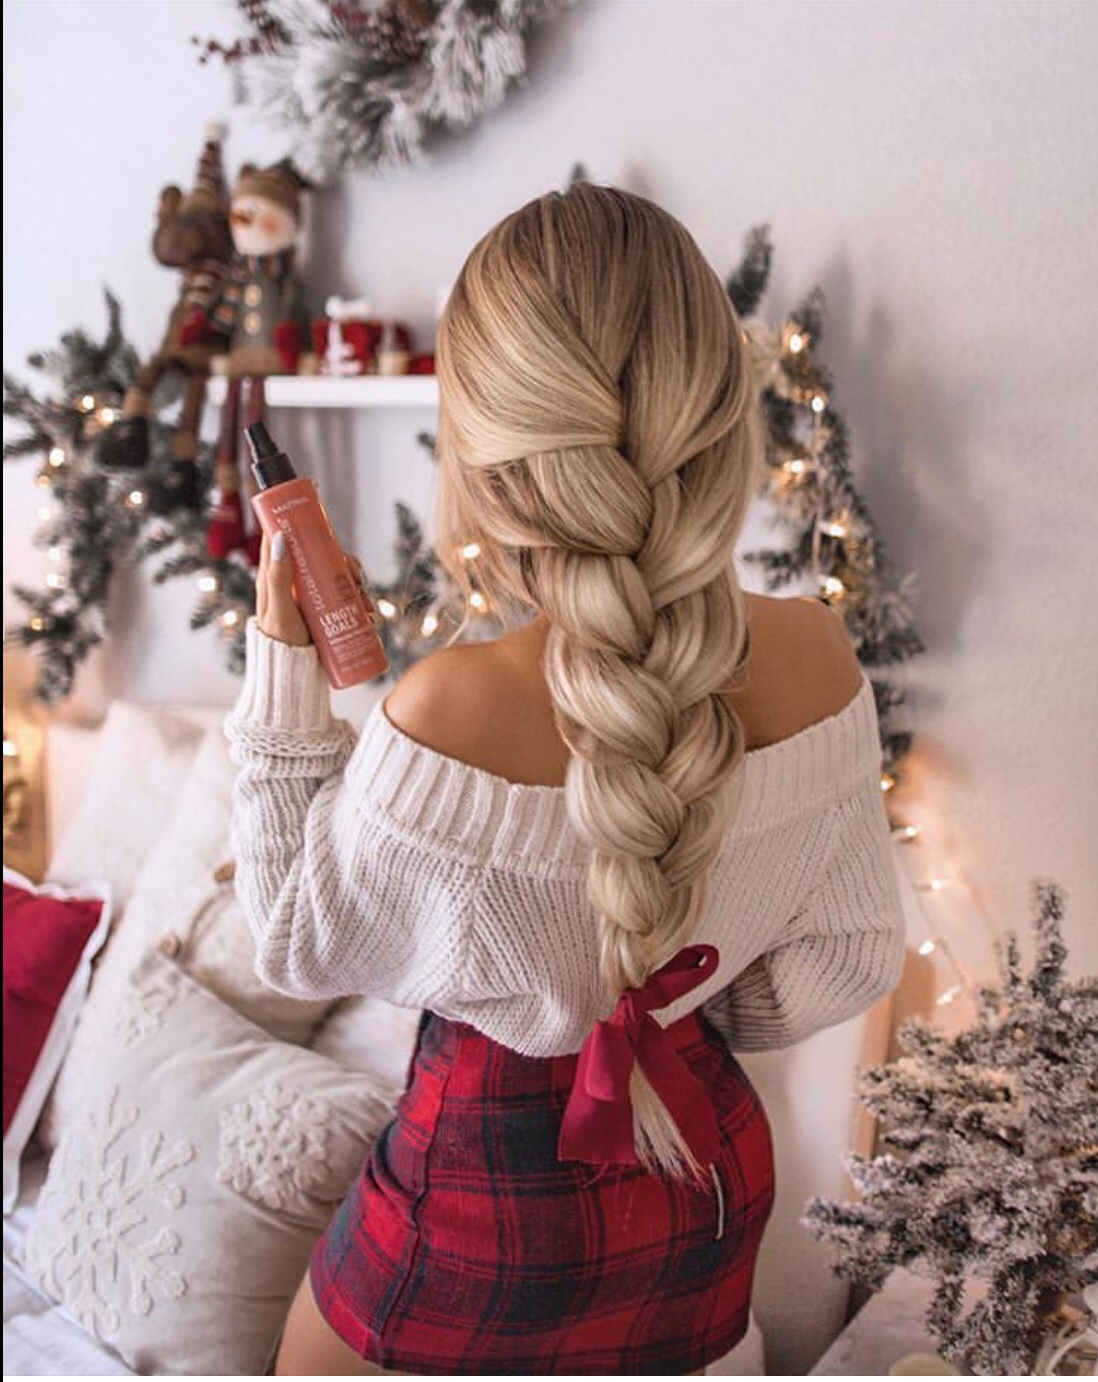 13 Cute Christmas Outfits For Women To Match Your Look